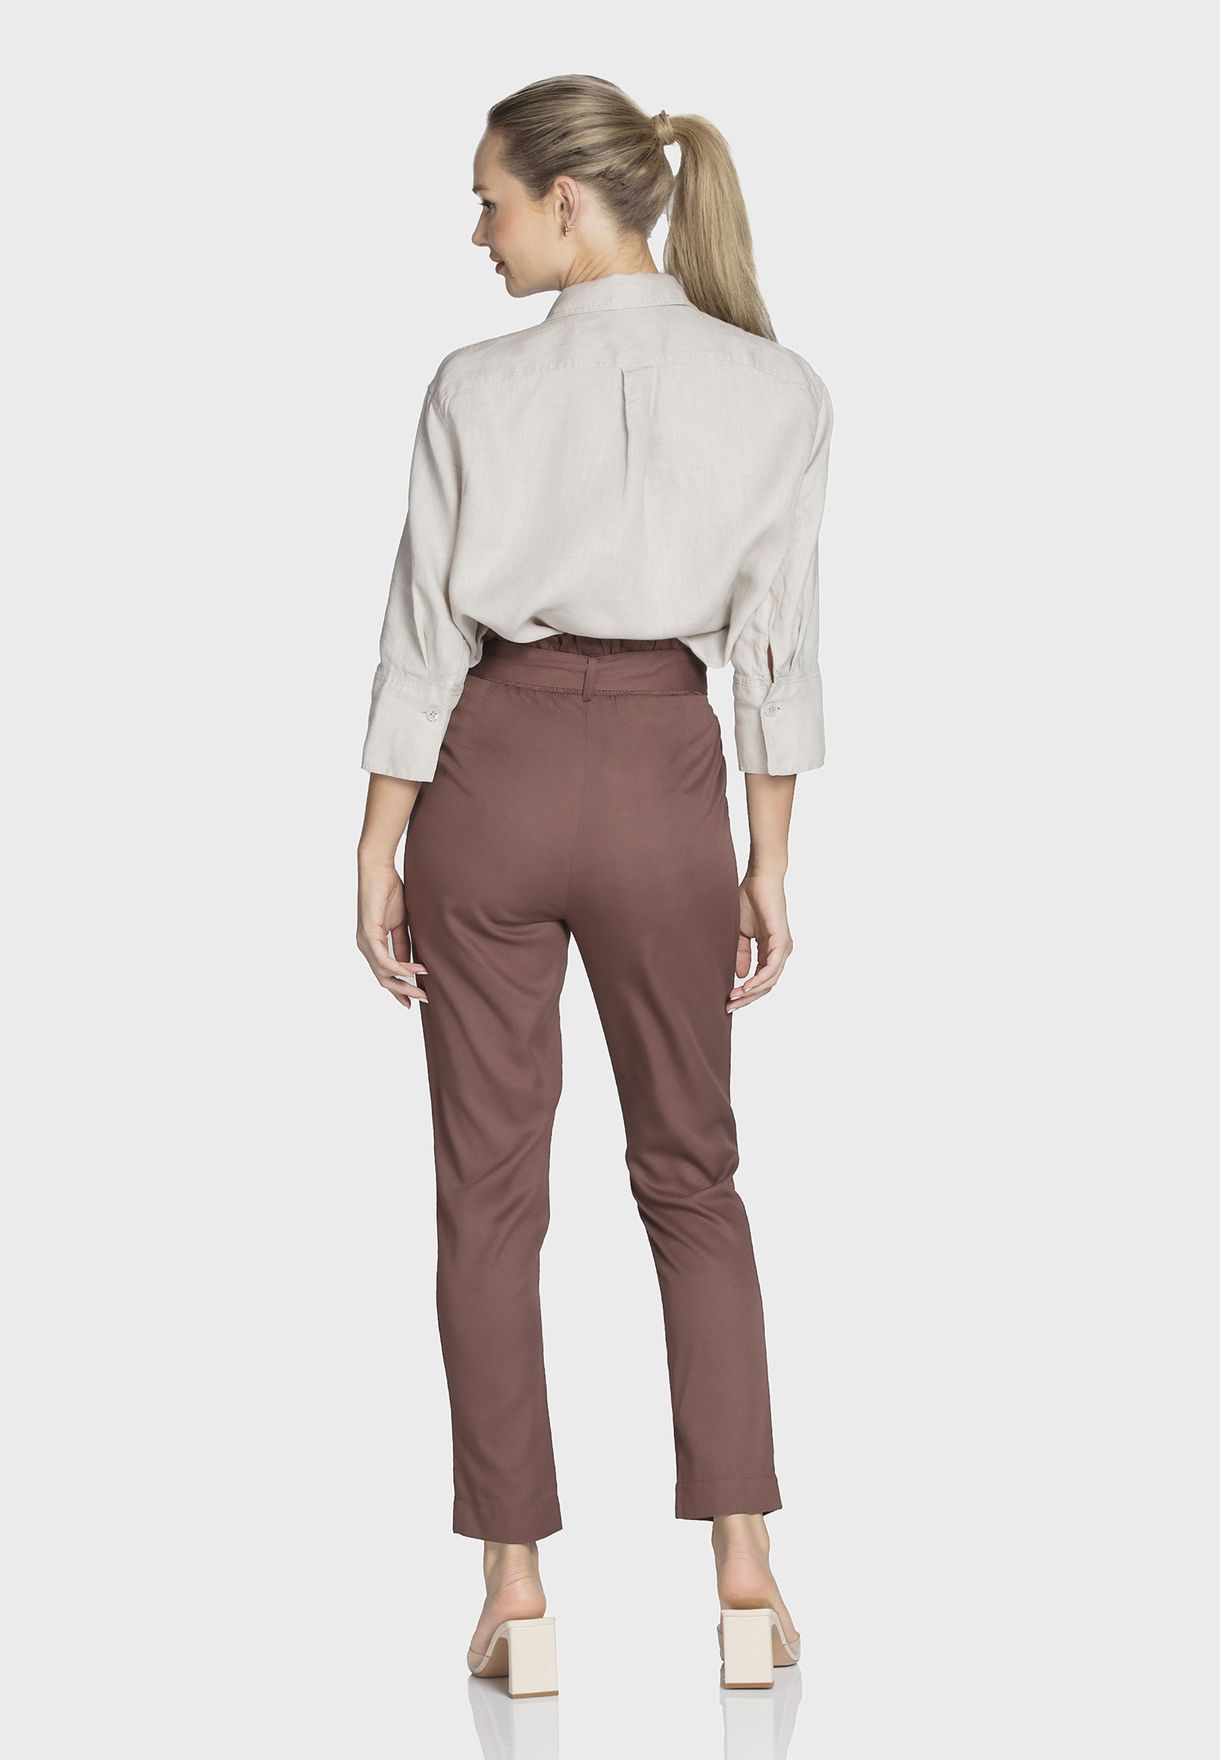 Belted Pleat Detail Pants